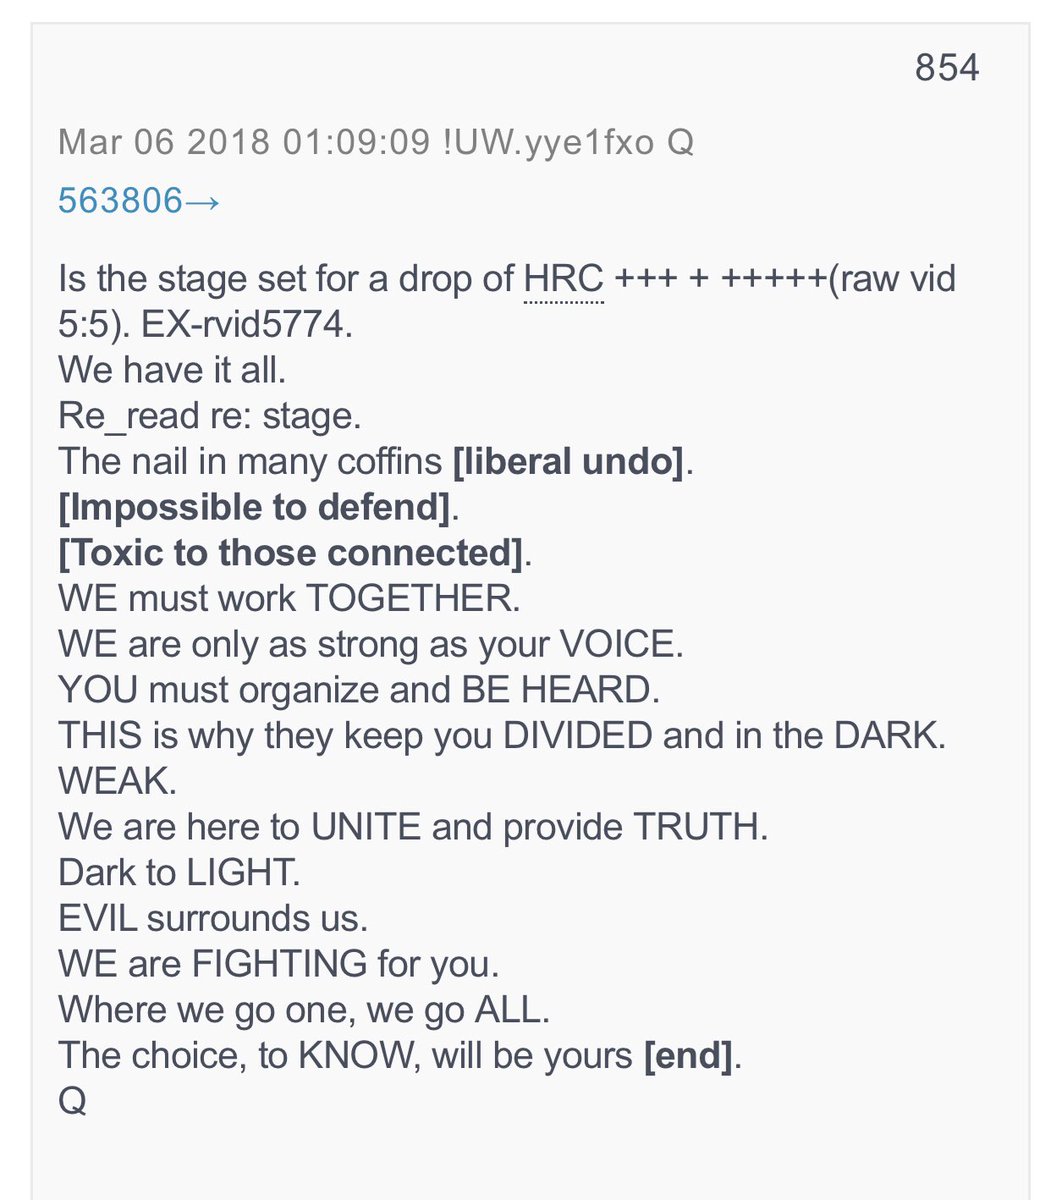 PART 2 - CONTINUED: America Warned Is Unprepared For Q & Trump’s Cataclysmic Destruction Of “Deep State” - Page 40 D1ffa421ccb38bf231bf5dd8efbbbbbd9517329e0aaea1238afca4575c5b2321